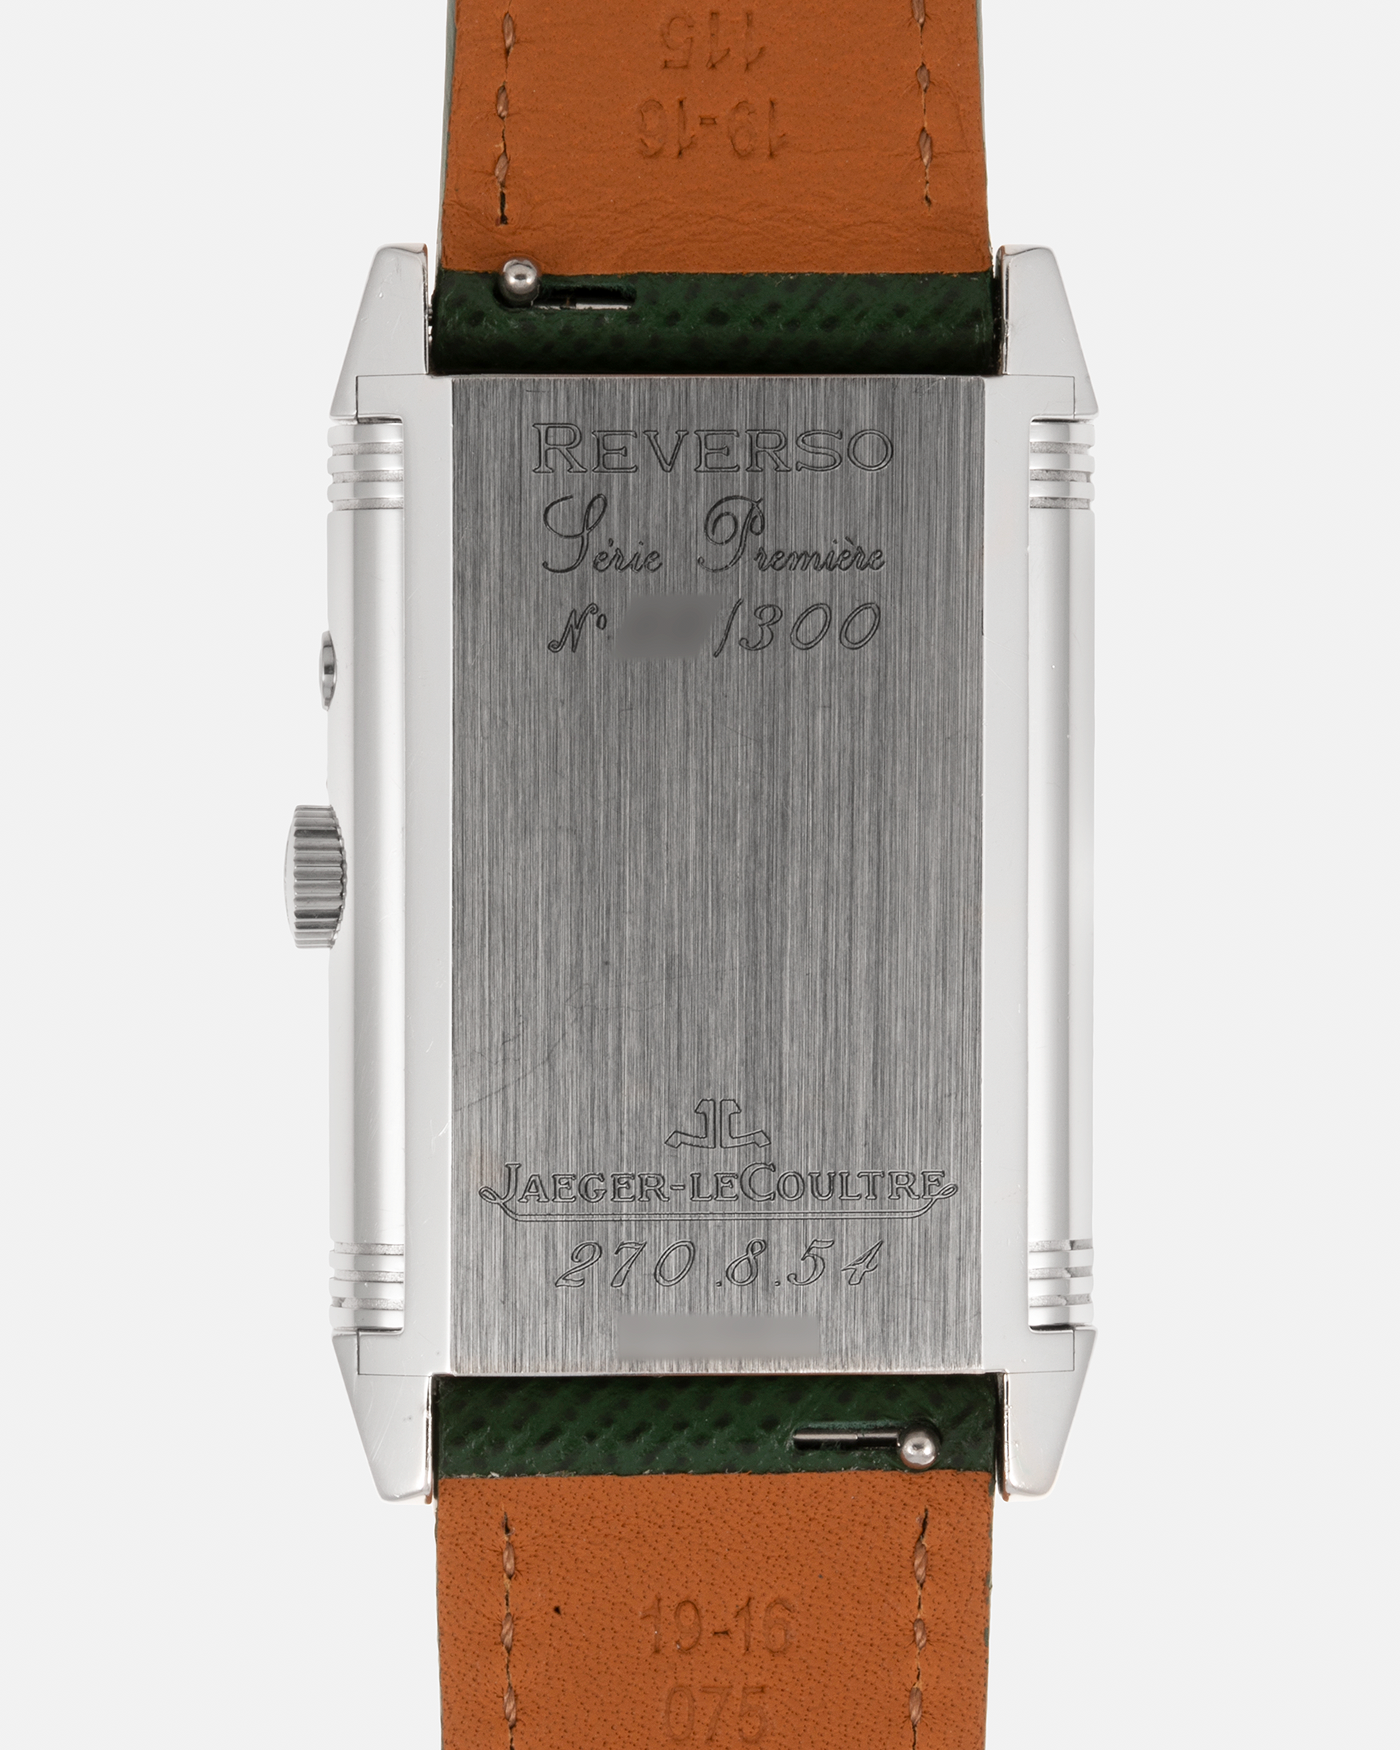 Brand: Jaeger LeCoultre Year: 2000s Model: Reverso Duoface Japan Edition Green, Limited Edition of 300 Pieces Reference Number: 270.8.54 Material: Stainless Steel Movement: Jaeger LeCoultre Cal. 854, Manual-Winding Case Diameter: 42mm x 26mm Lug Width: 19mm Strap: Molequin Hunter Green Textured Calf Leather Strap with Signed Stainless Steel Deployant Clasp, with additional Green Alligator Leather Strap